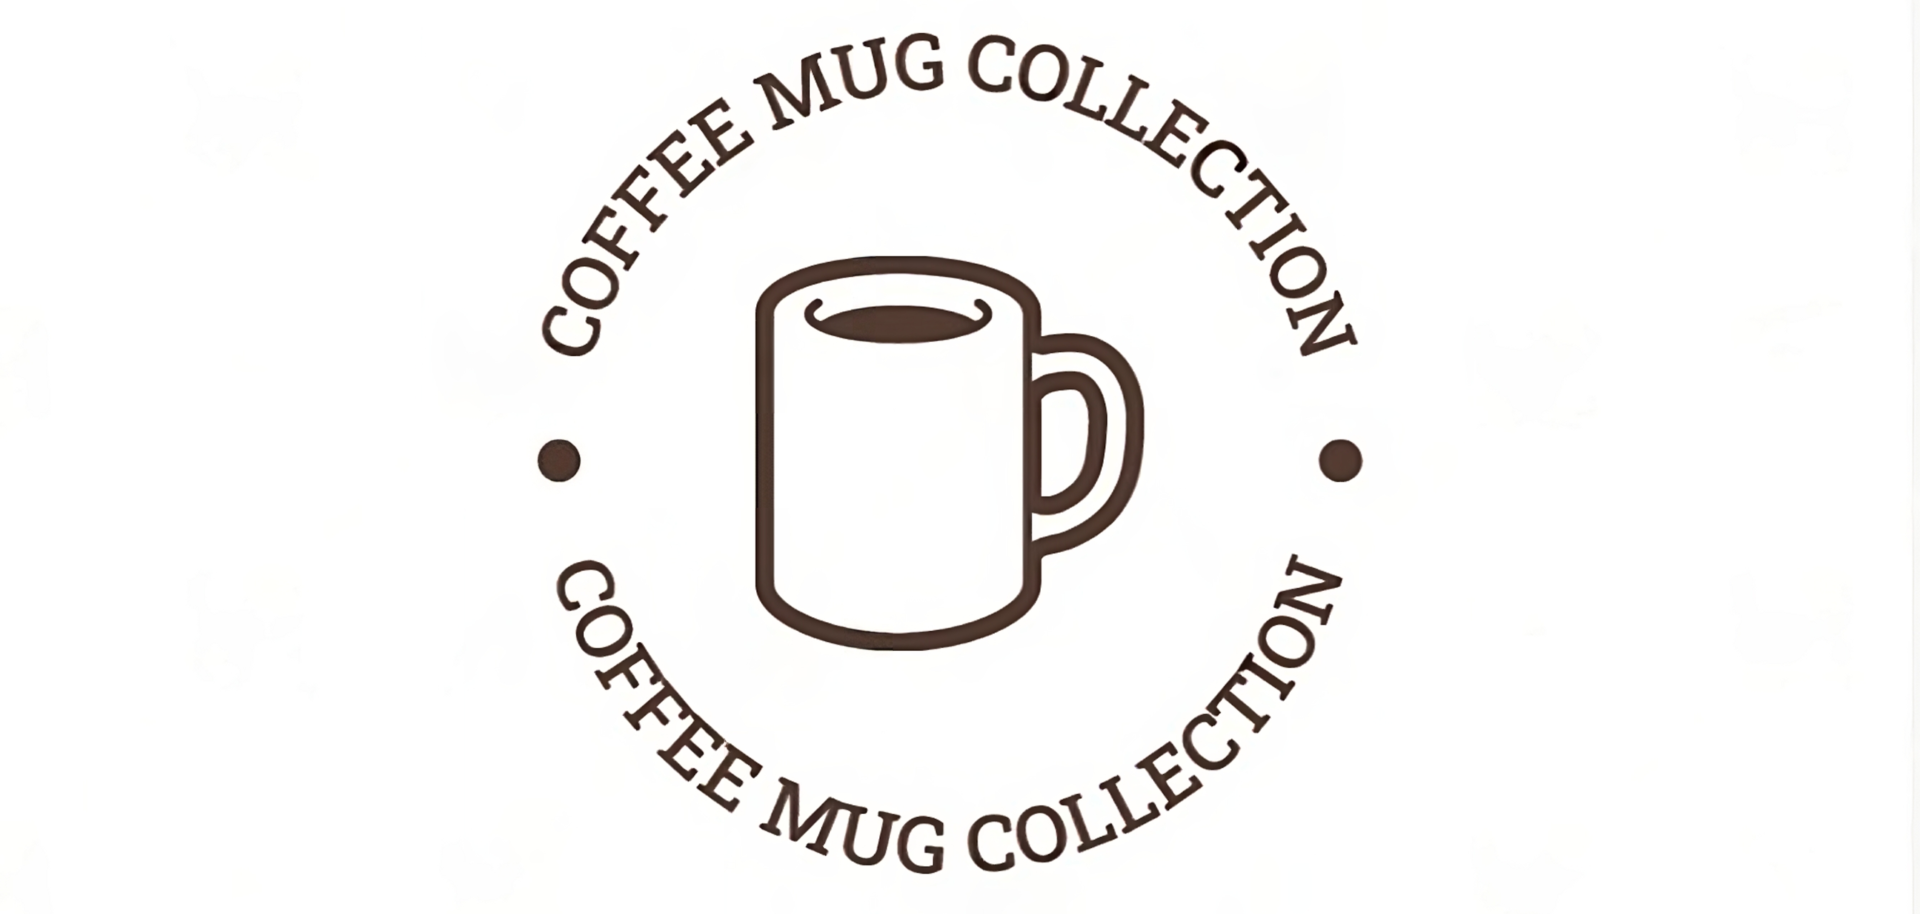 https://coffeemugcollection.com/wp-content/uploads/2023/05/cropped-round-logo.png